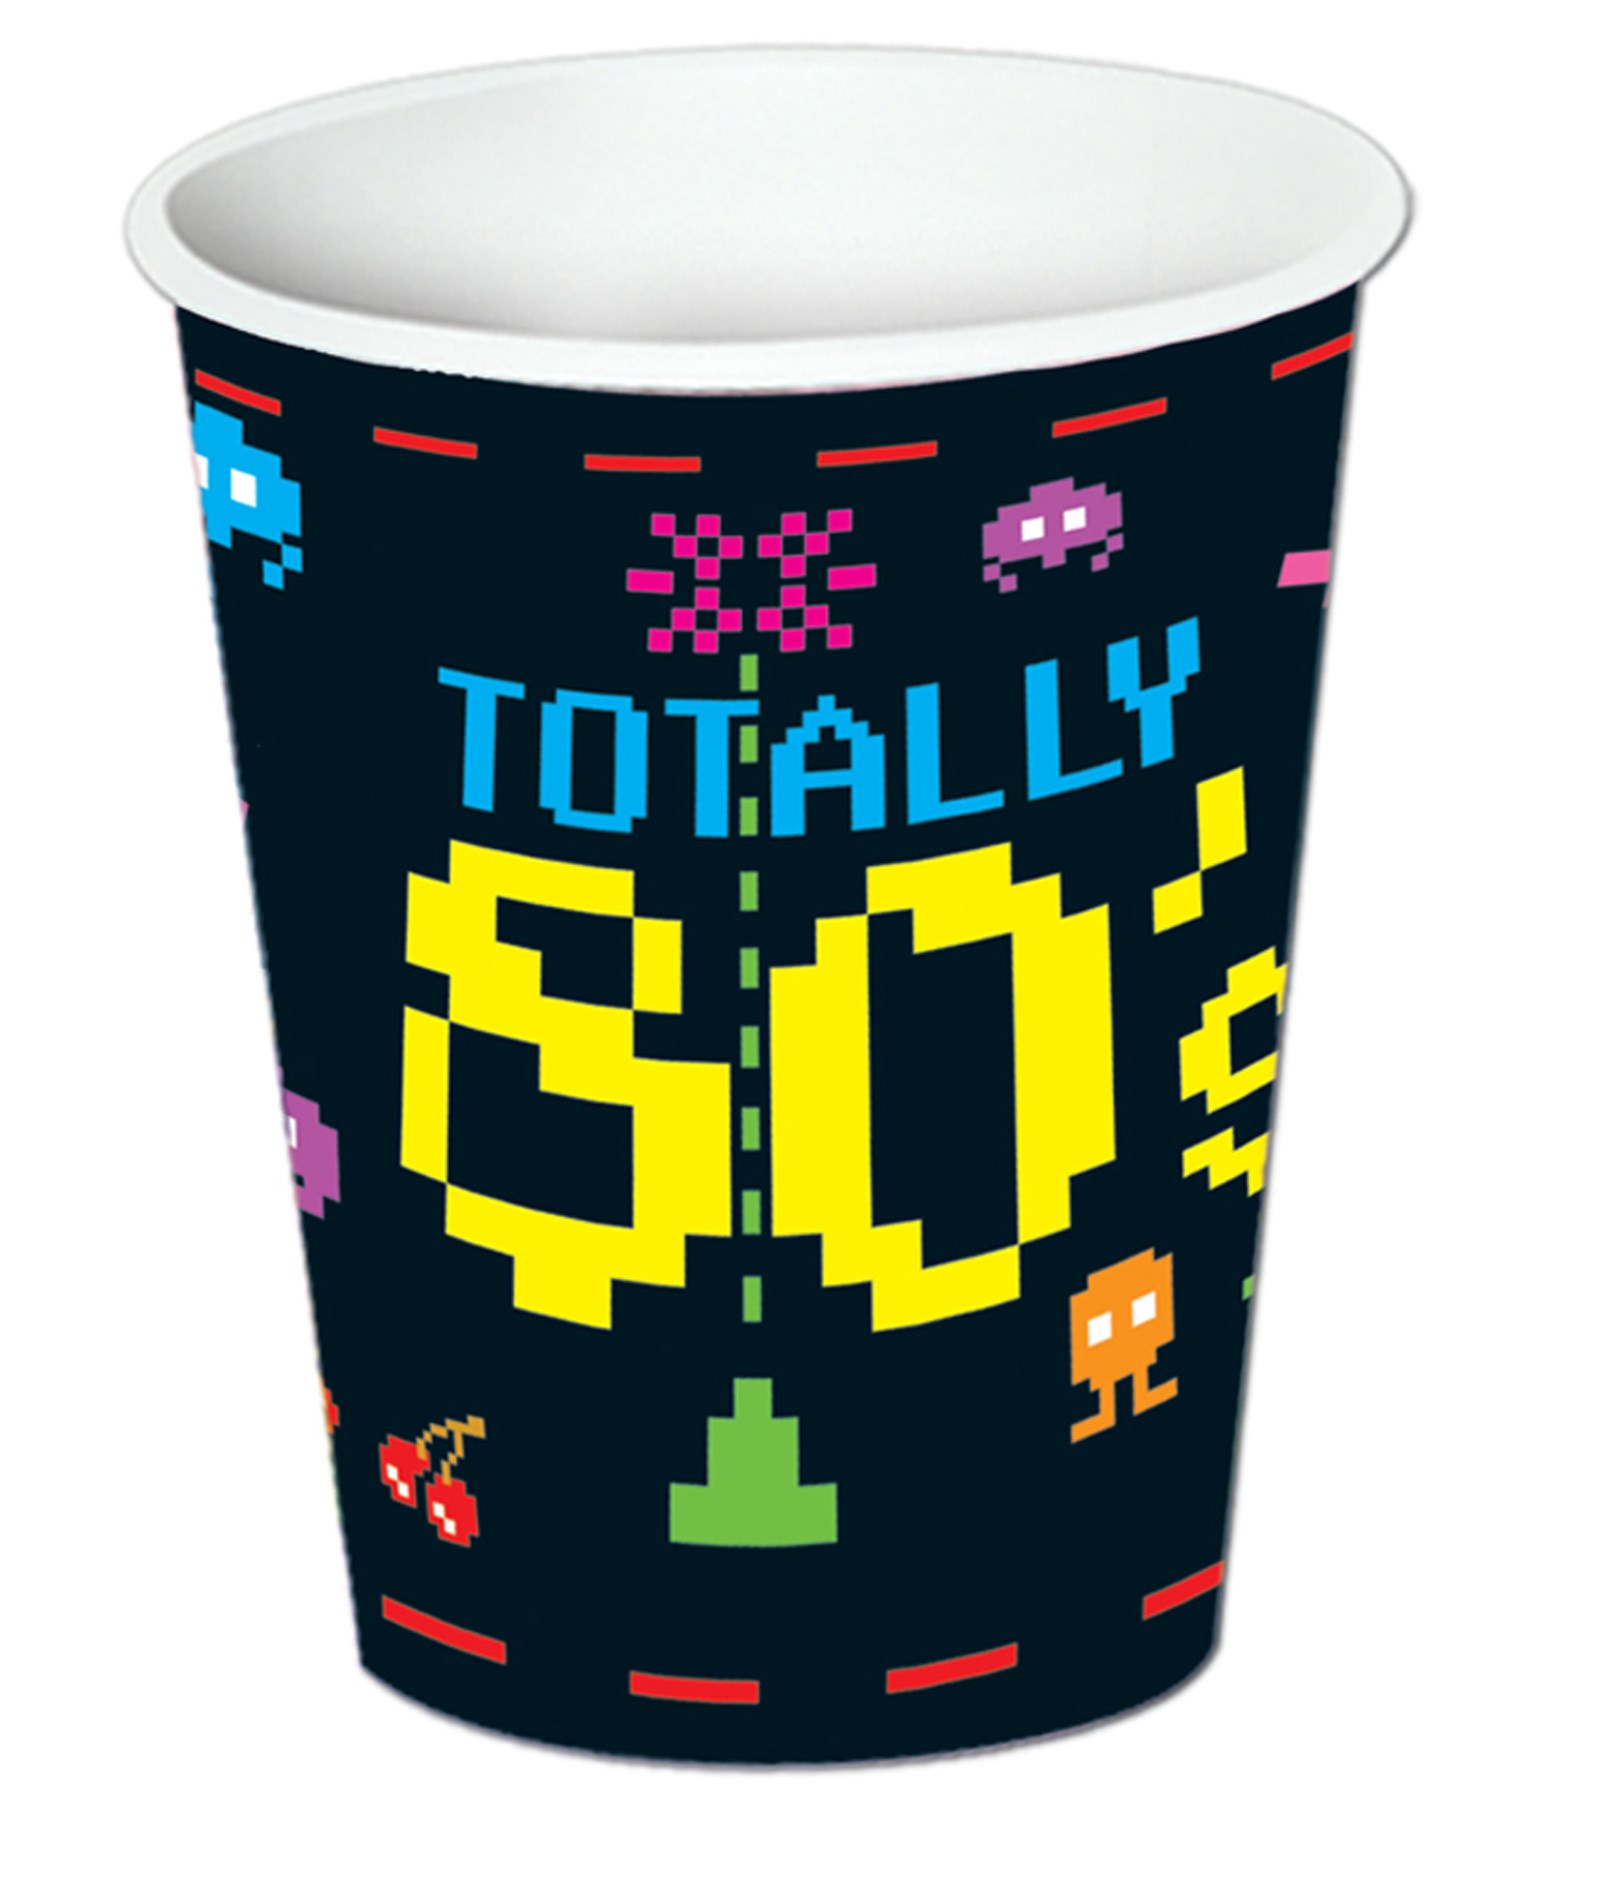 Totally 80s - 9 oz. Paper Cups 8 count